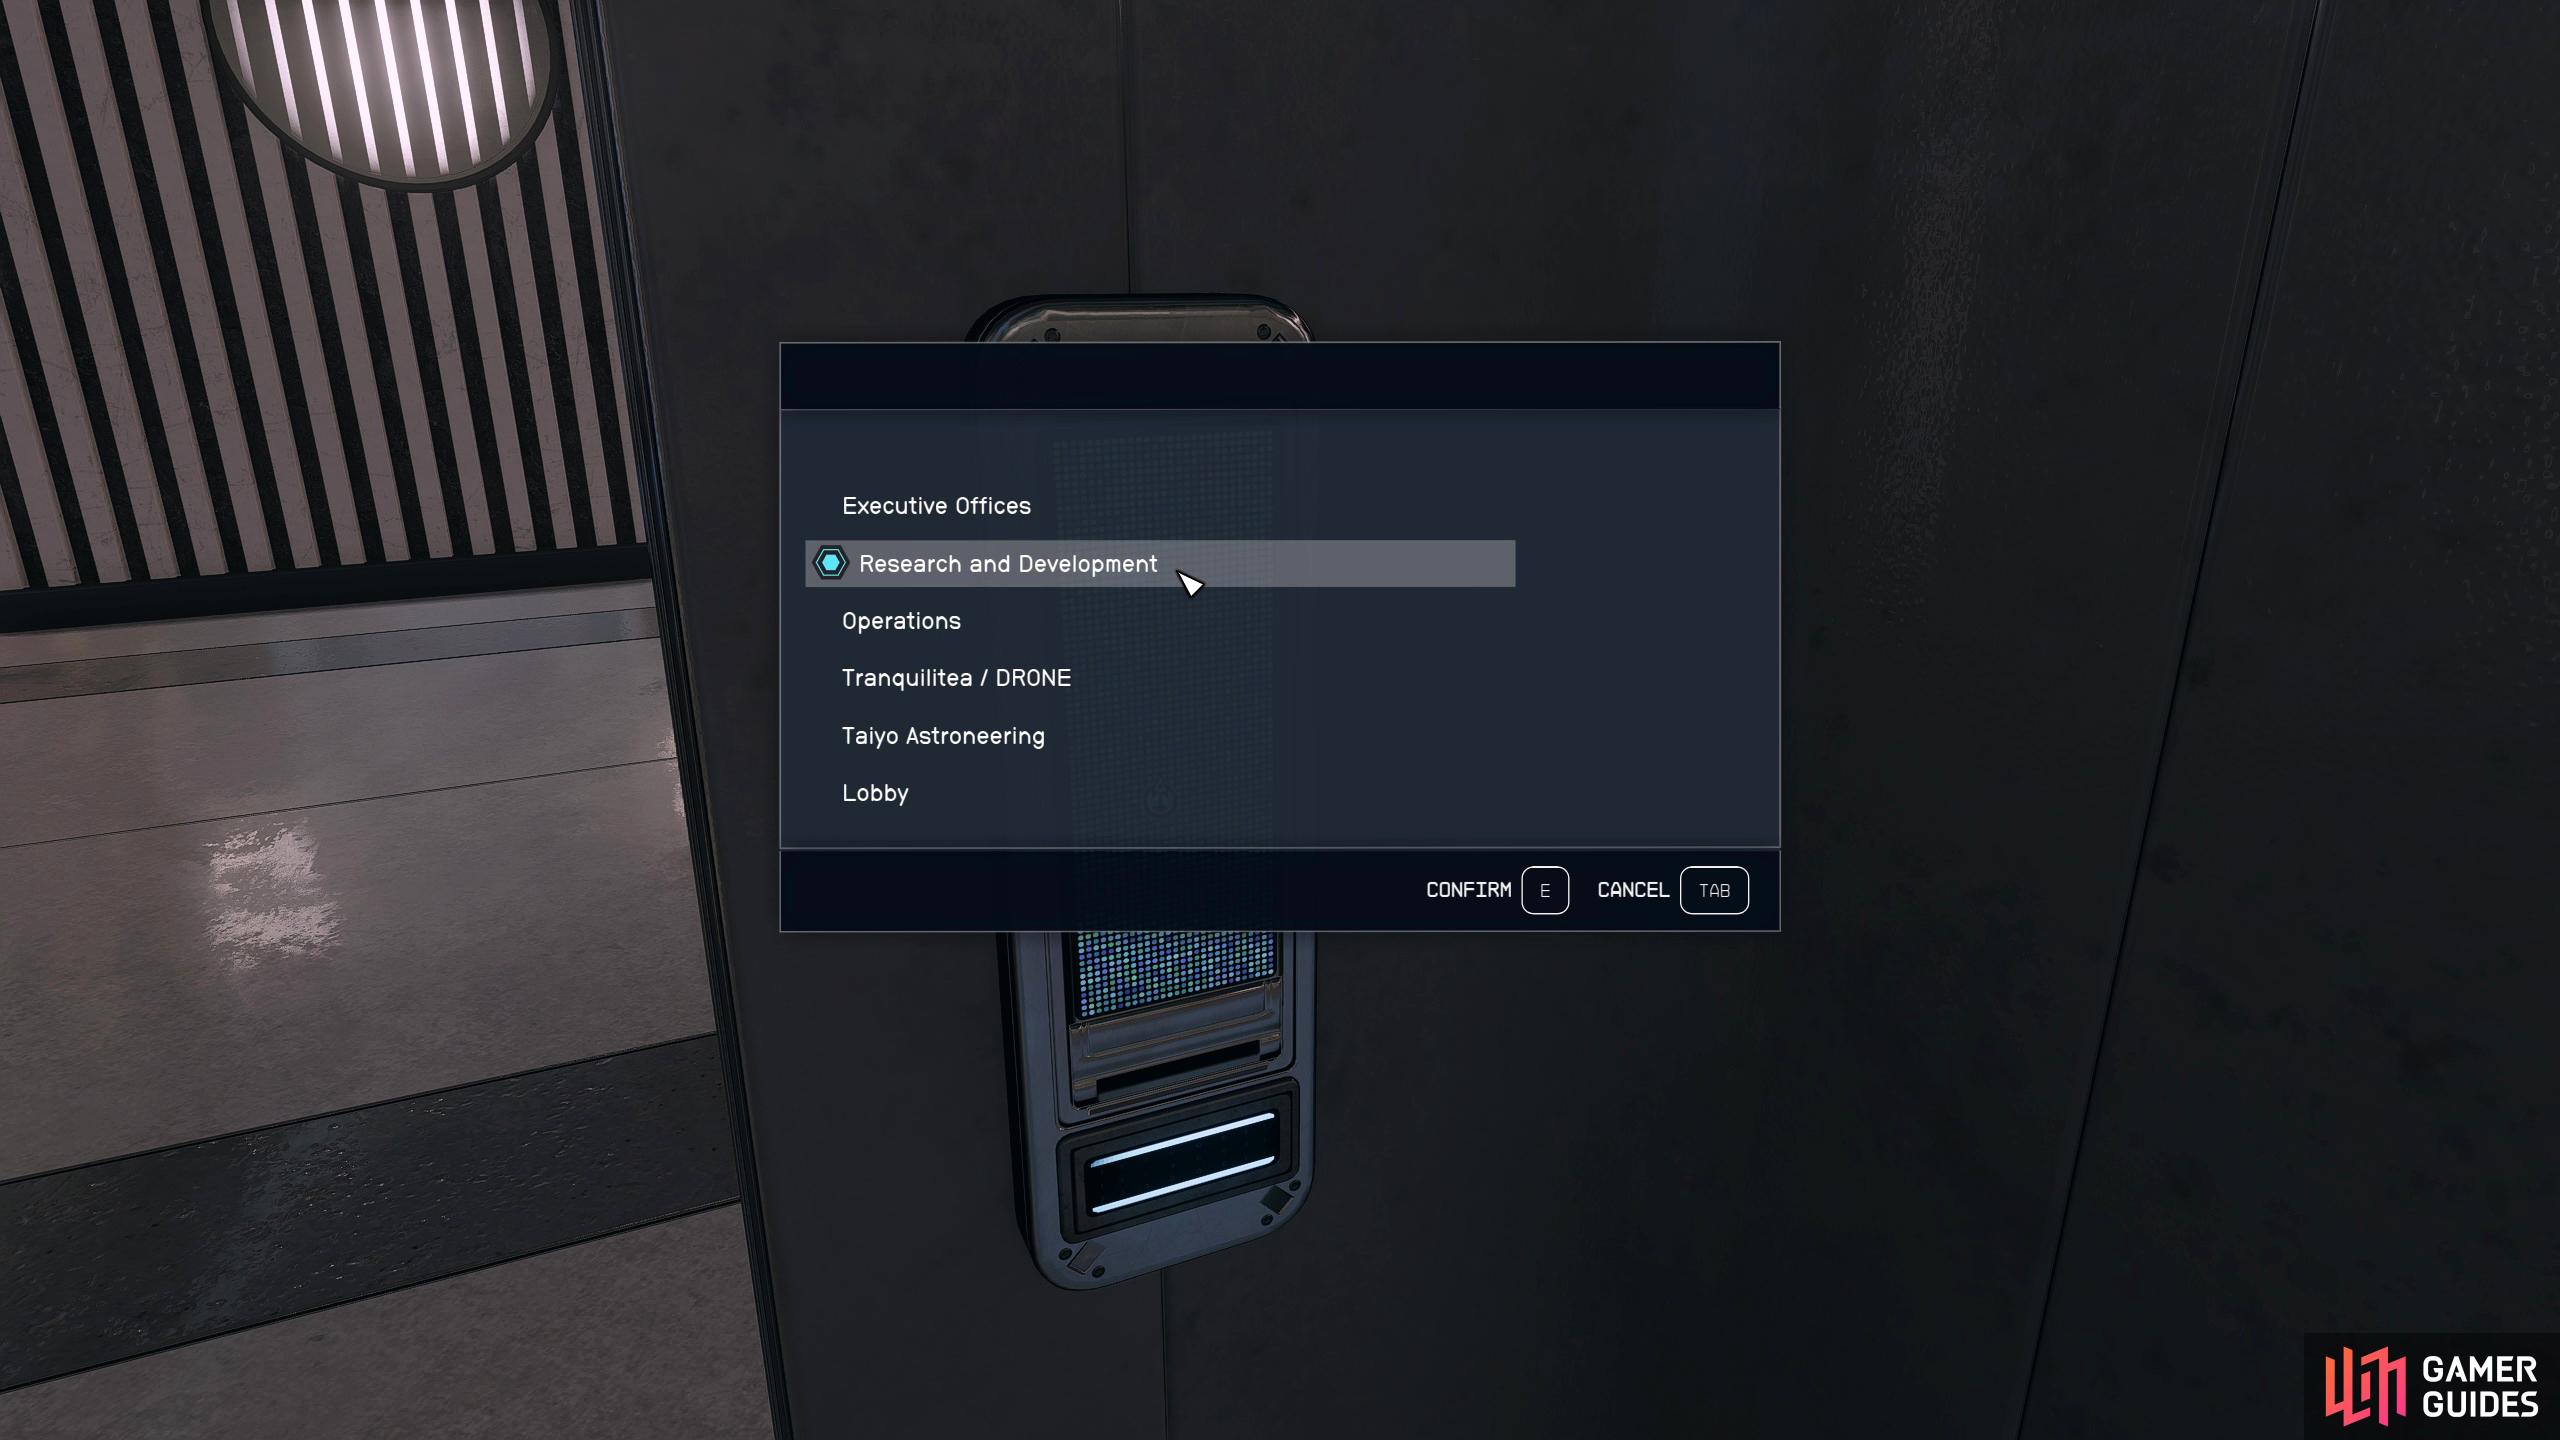 Use the elevator, and select the Research and Development floor.